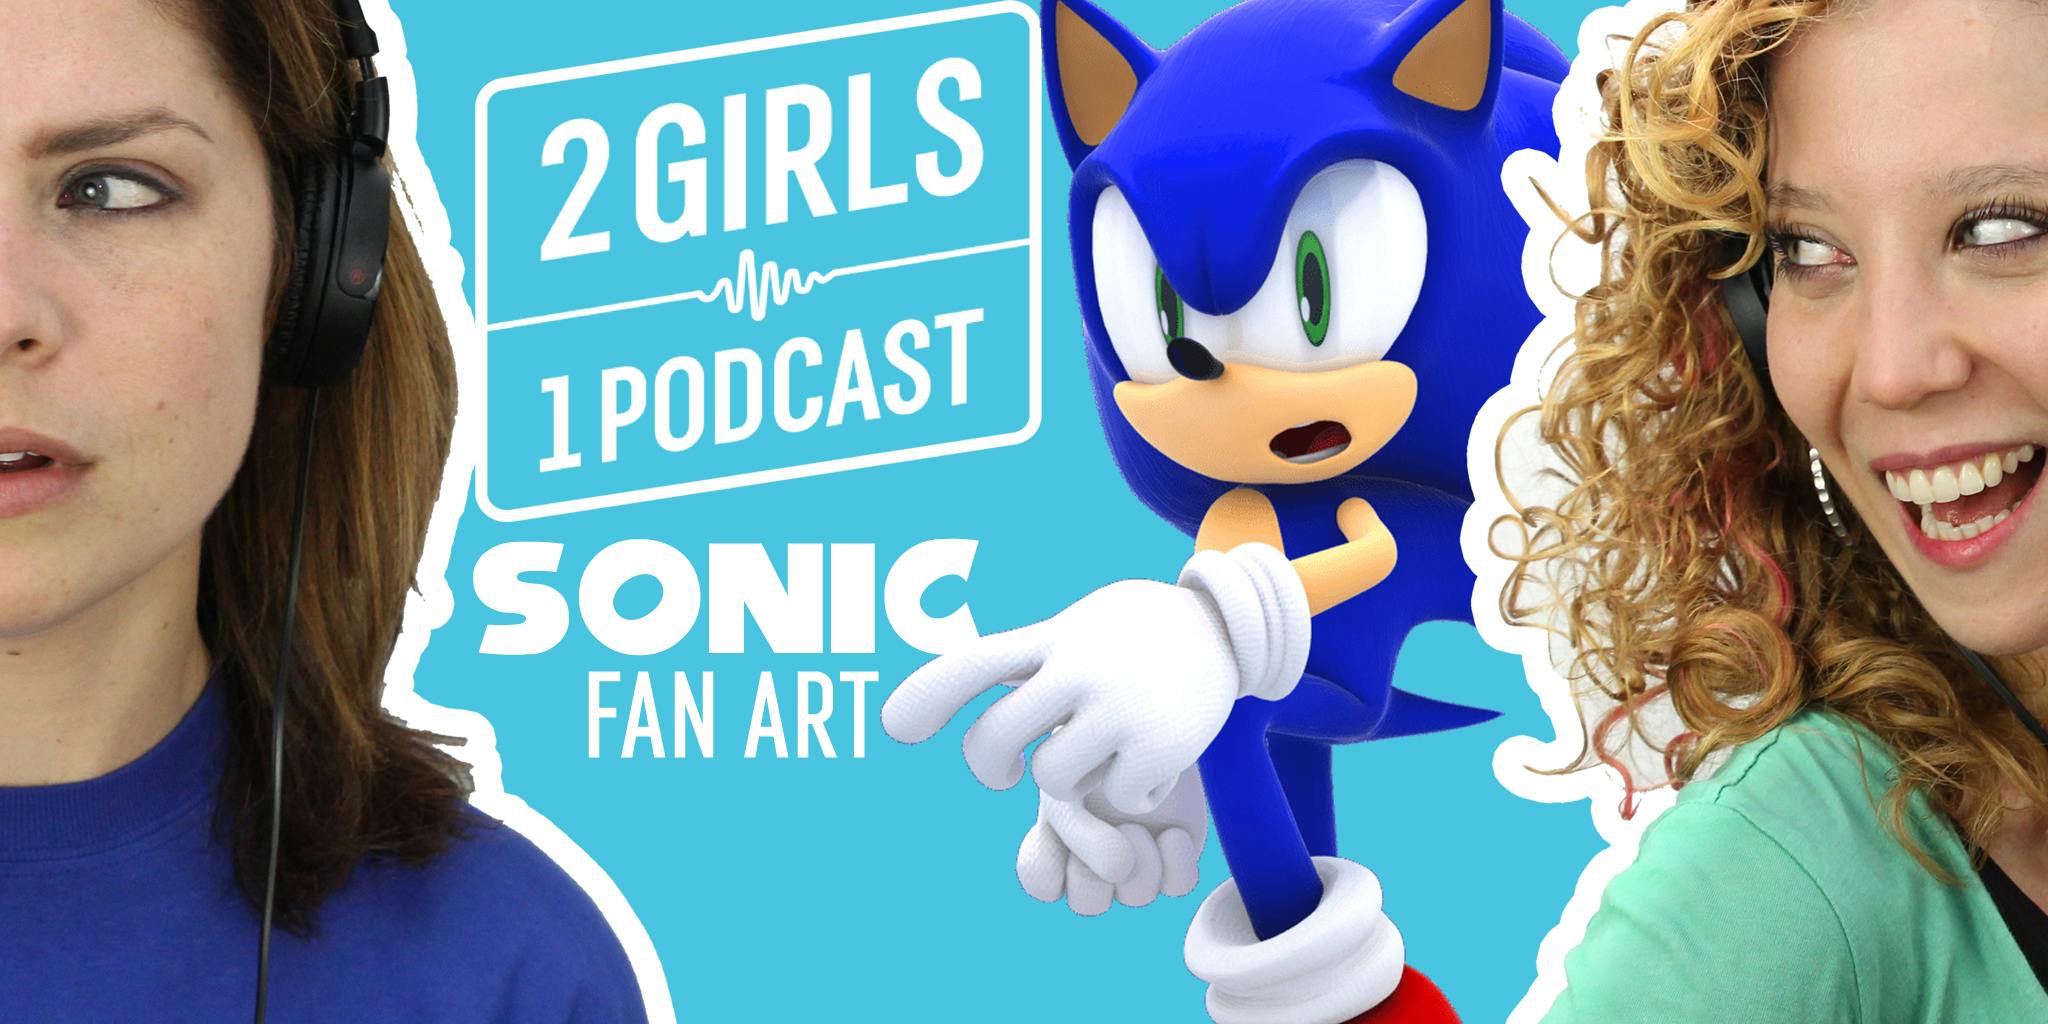 Fan Sonic Porn - Why Is There So Much Sonic the Hedgehog Porn?